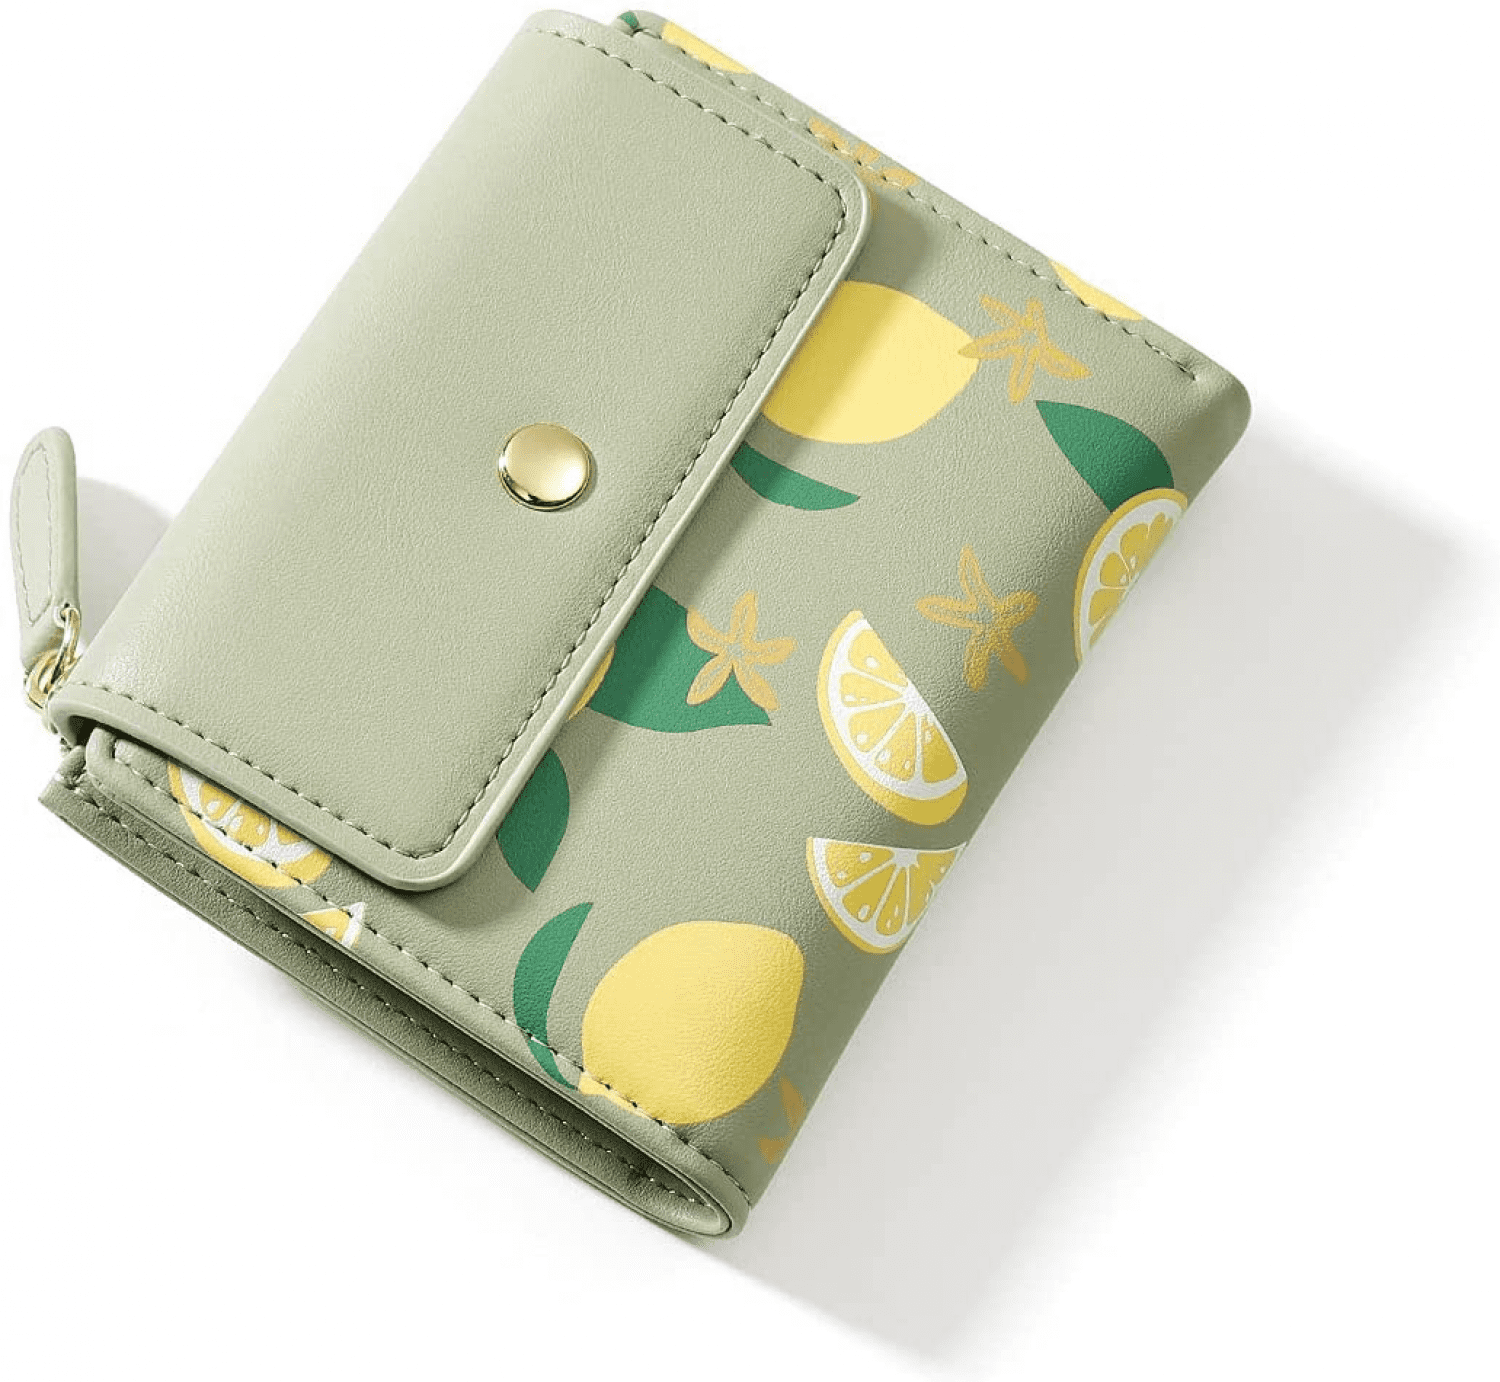 XIOMARA Lemon Print Credit Card Wallet with Zipper, Credit Card Holder  Wallets for Women Leather Zipper Card Case for Ladies Girls/Gift Box